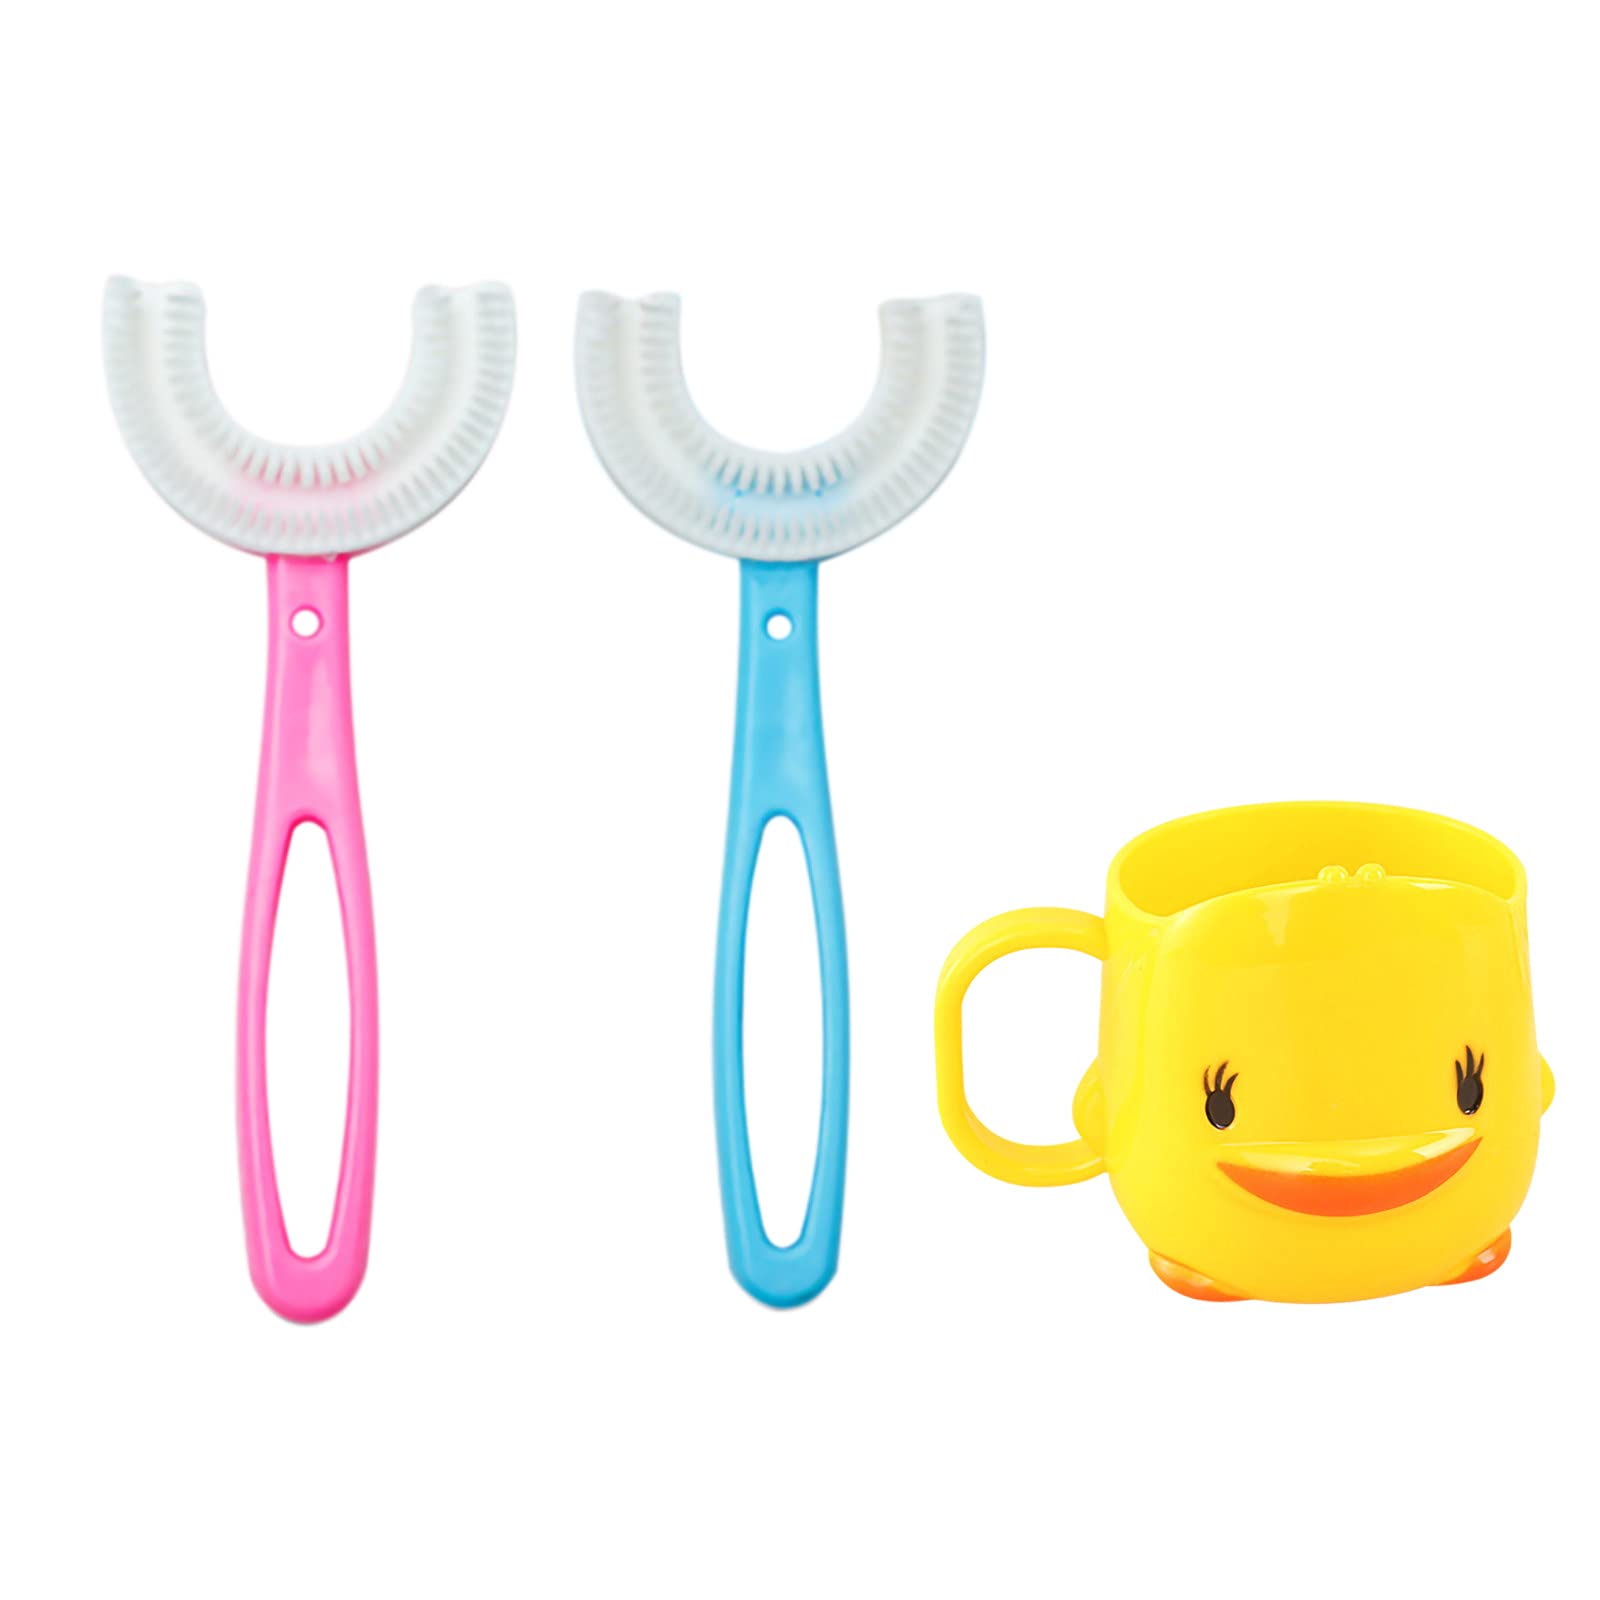 Goaupin 2 Pcs U-Shaped Manual Toothbrush for Kids(2-12Year), with a Toothbrushing Cup, U-Shape Portable Baby Food Grade Silicone Toothbrush ,Special Design for Toddlers/Children (B-2Pcs)